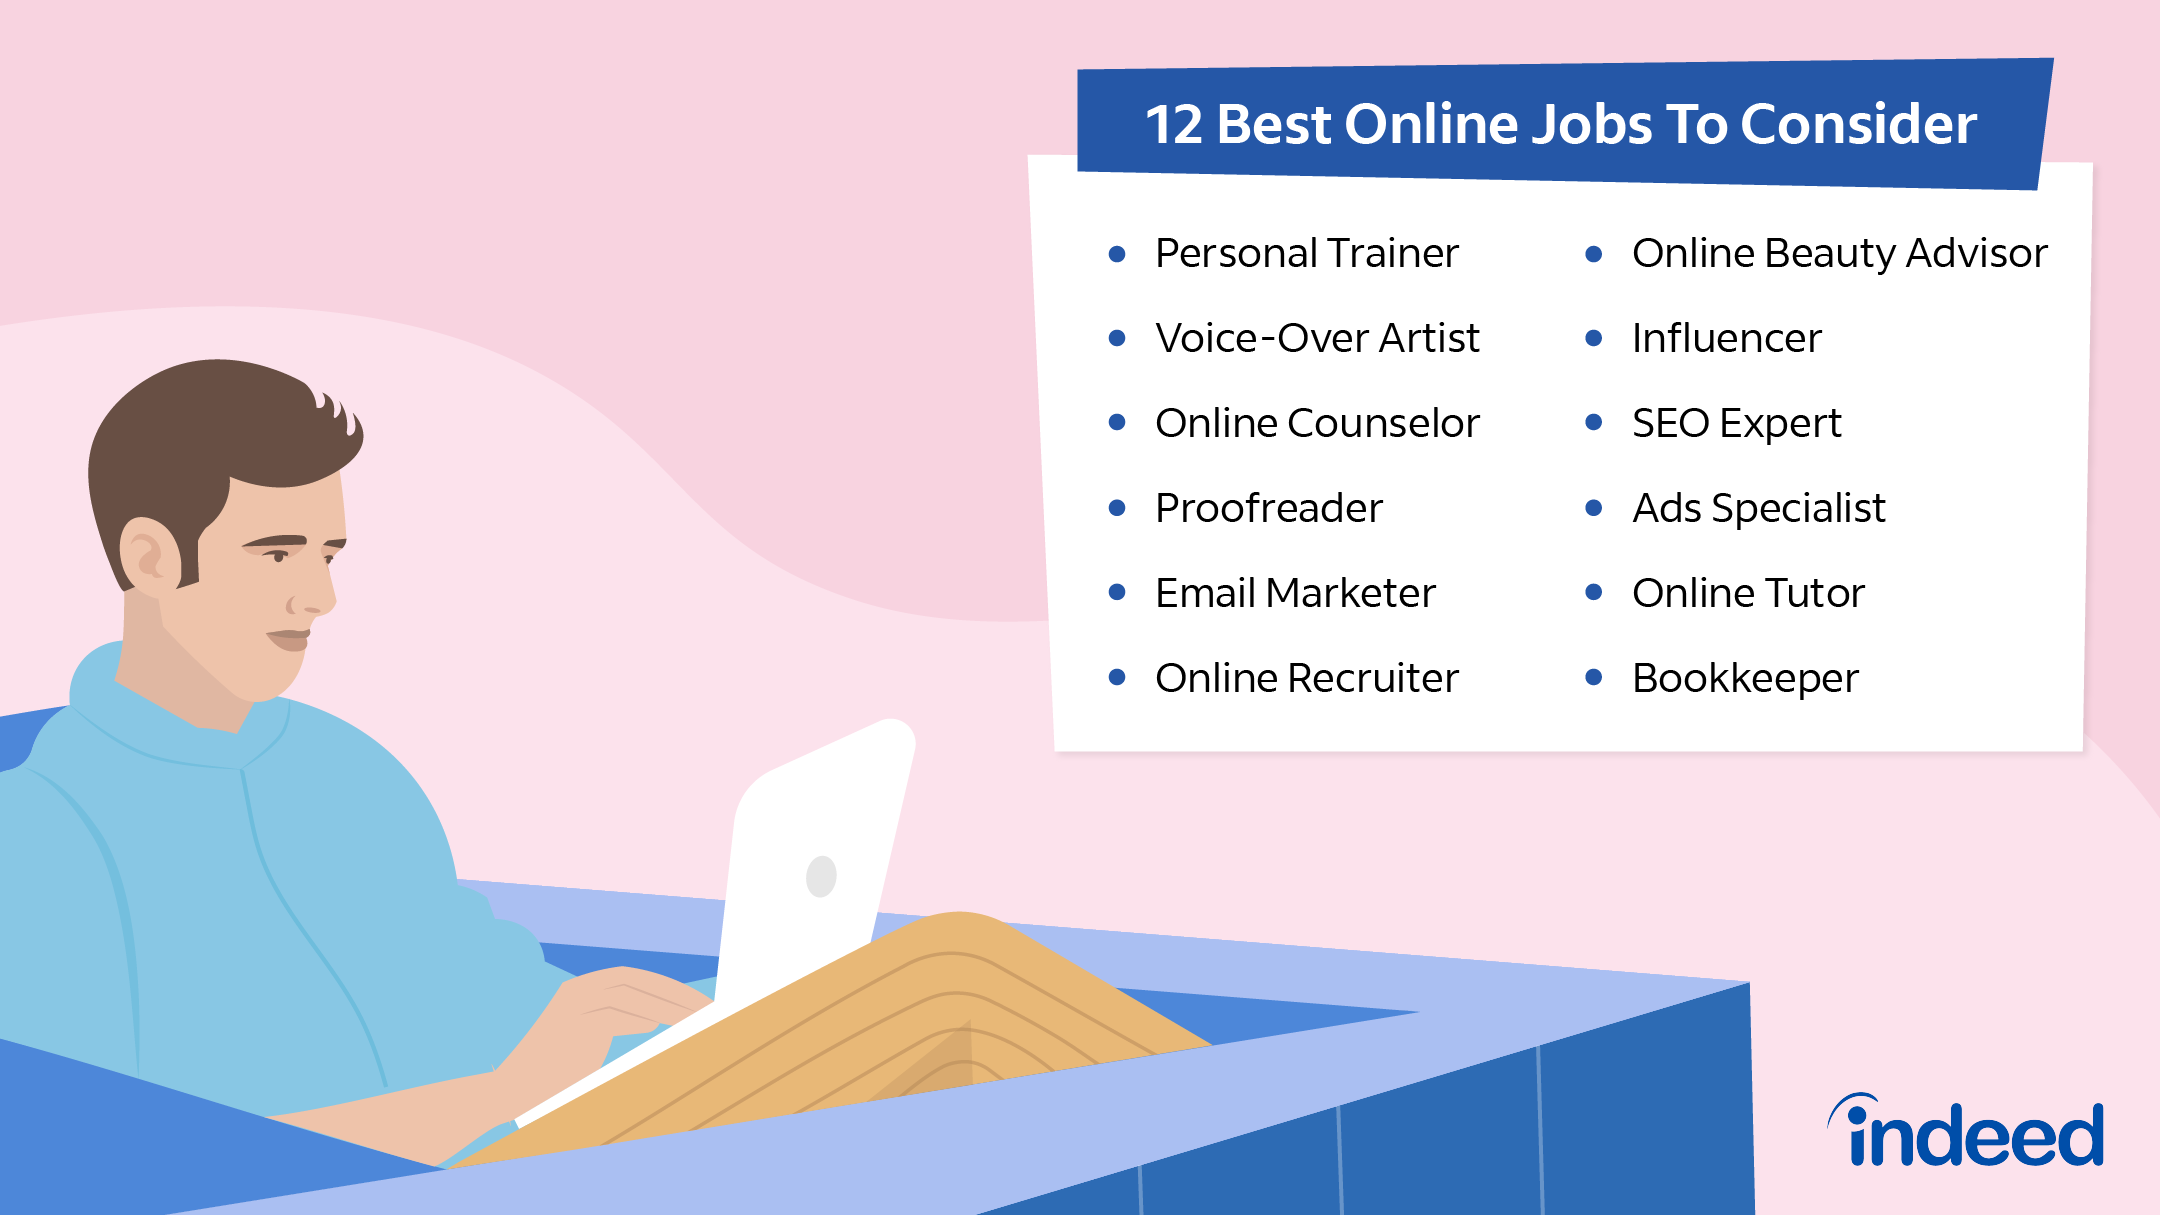 Now Hiring! 12 Best Companies for Teaching English Online